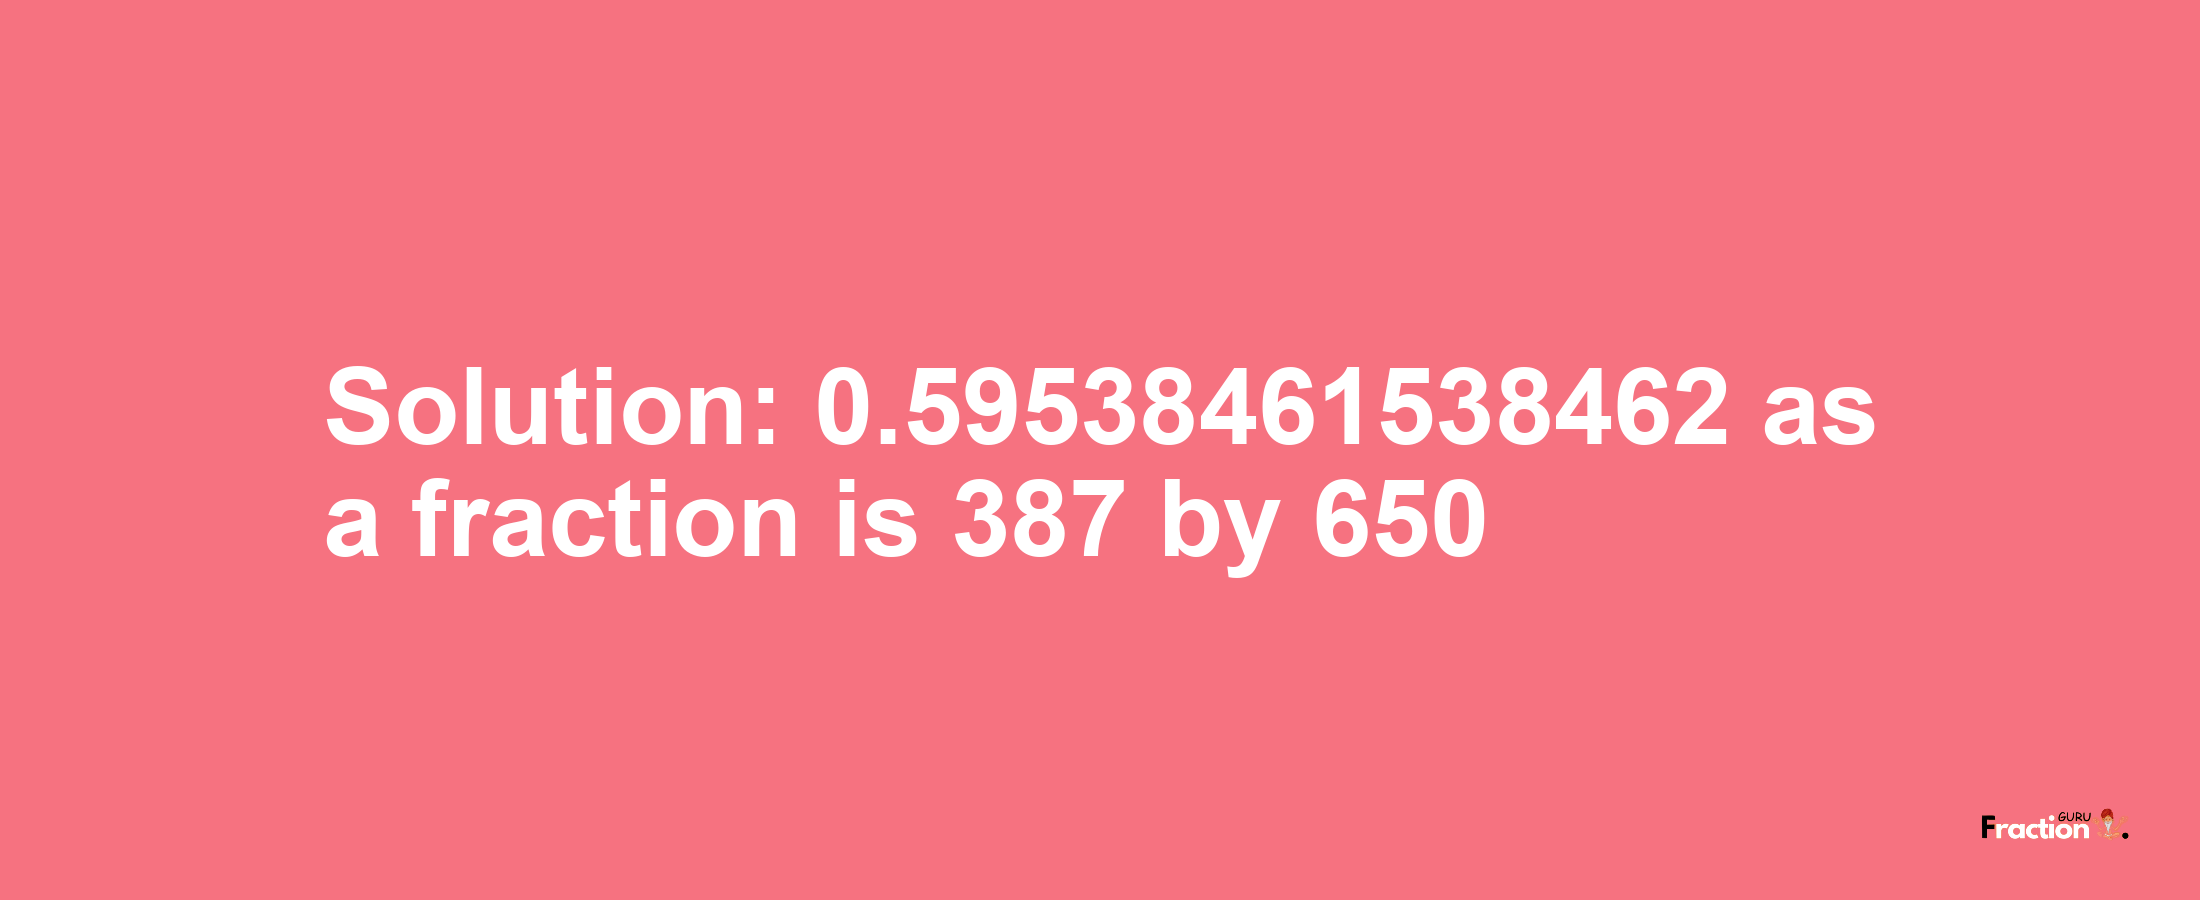 Solution:0.59538461538462 as a fraction is 387/650